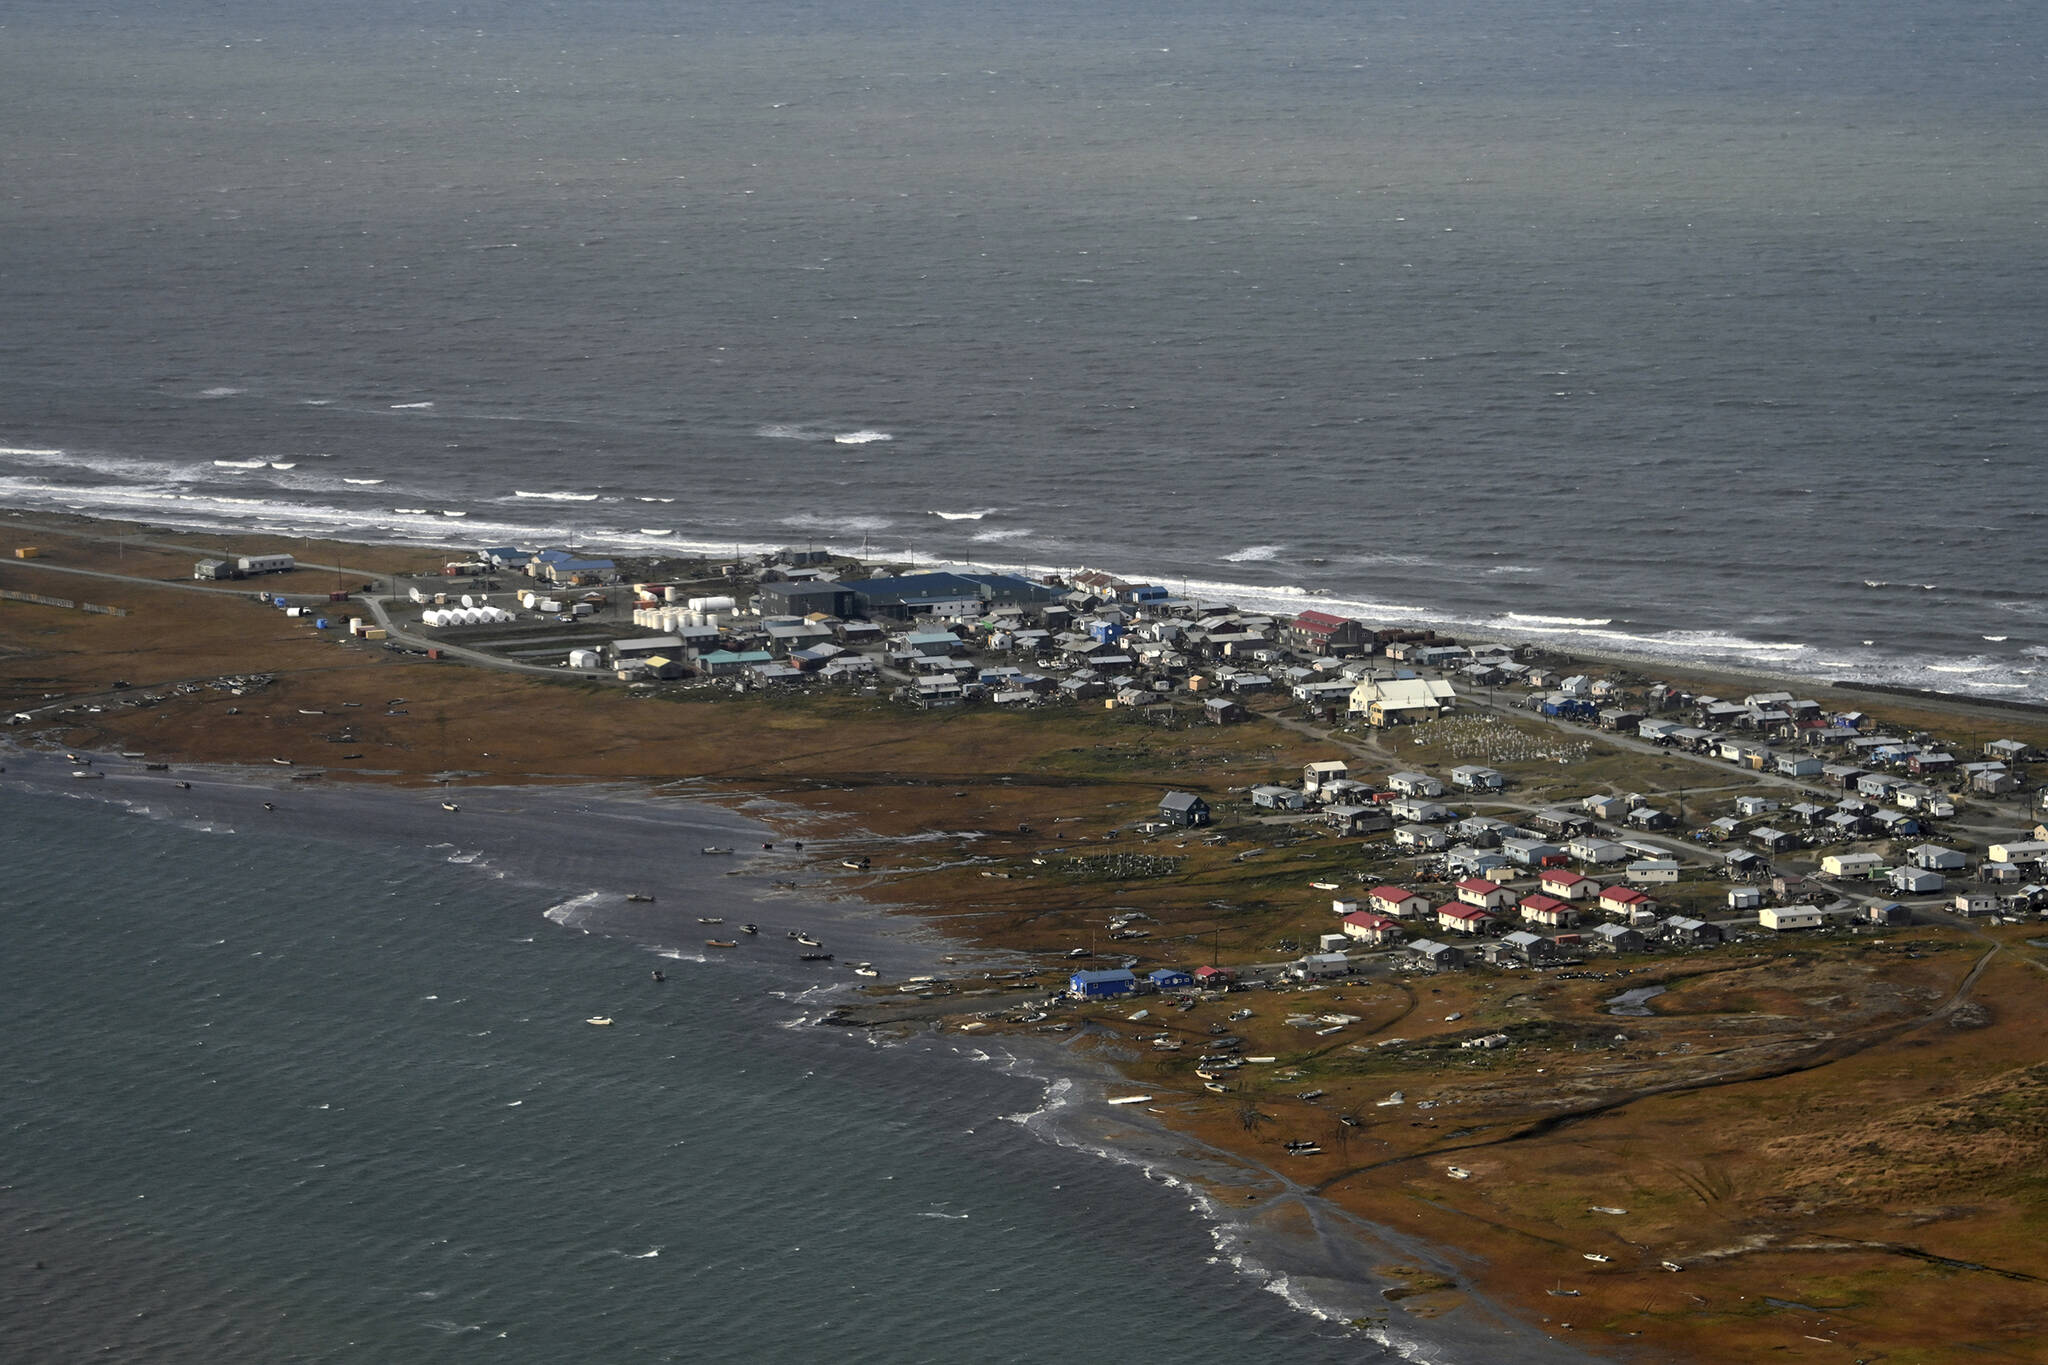 In this image provided by the U.S. Coast Guard, an aerial view taken during a search and rescue and damage assessment in Deering, Alaska, shows the damage caused by Typhoon Merbok, on Sept. 18, 2022. Authorities are making contact with some of the most remote villages in the United States to determine the need for food and water and assess damage from a massive weekend storm that flooded communities dotting Alaska’s vast western coast. (Petty Officer 3rd Class Ian Gray/U.S. Coast Guard via AP)